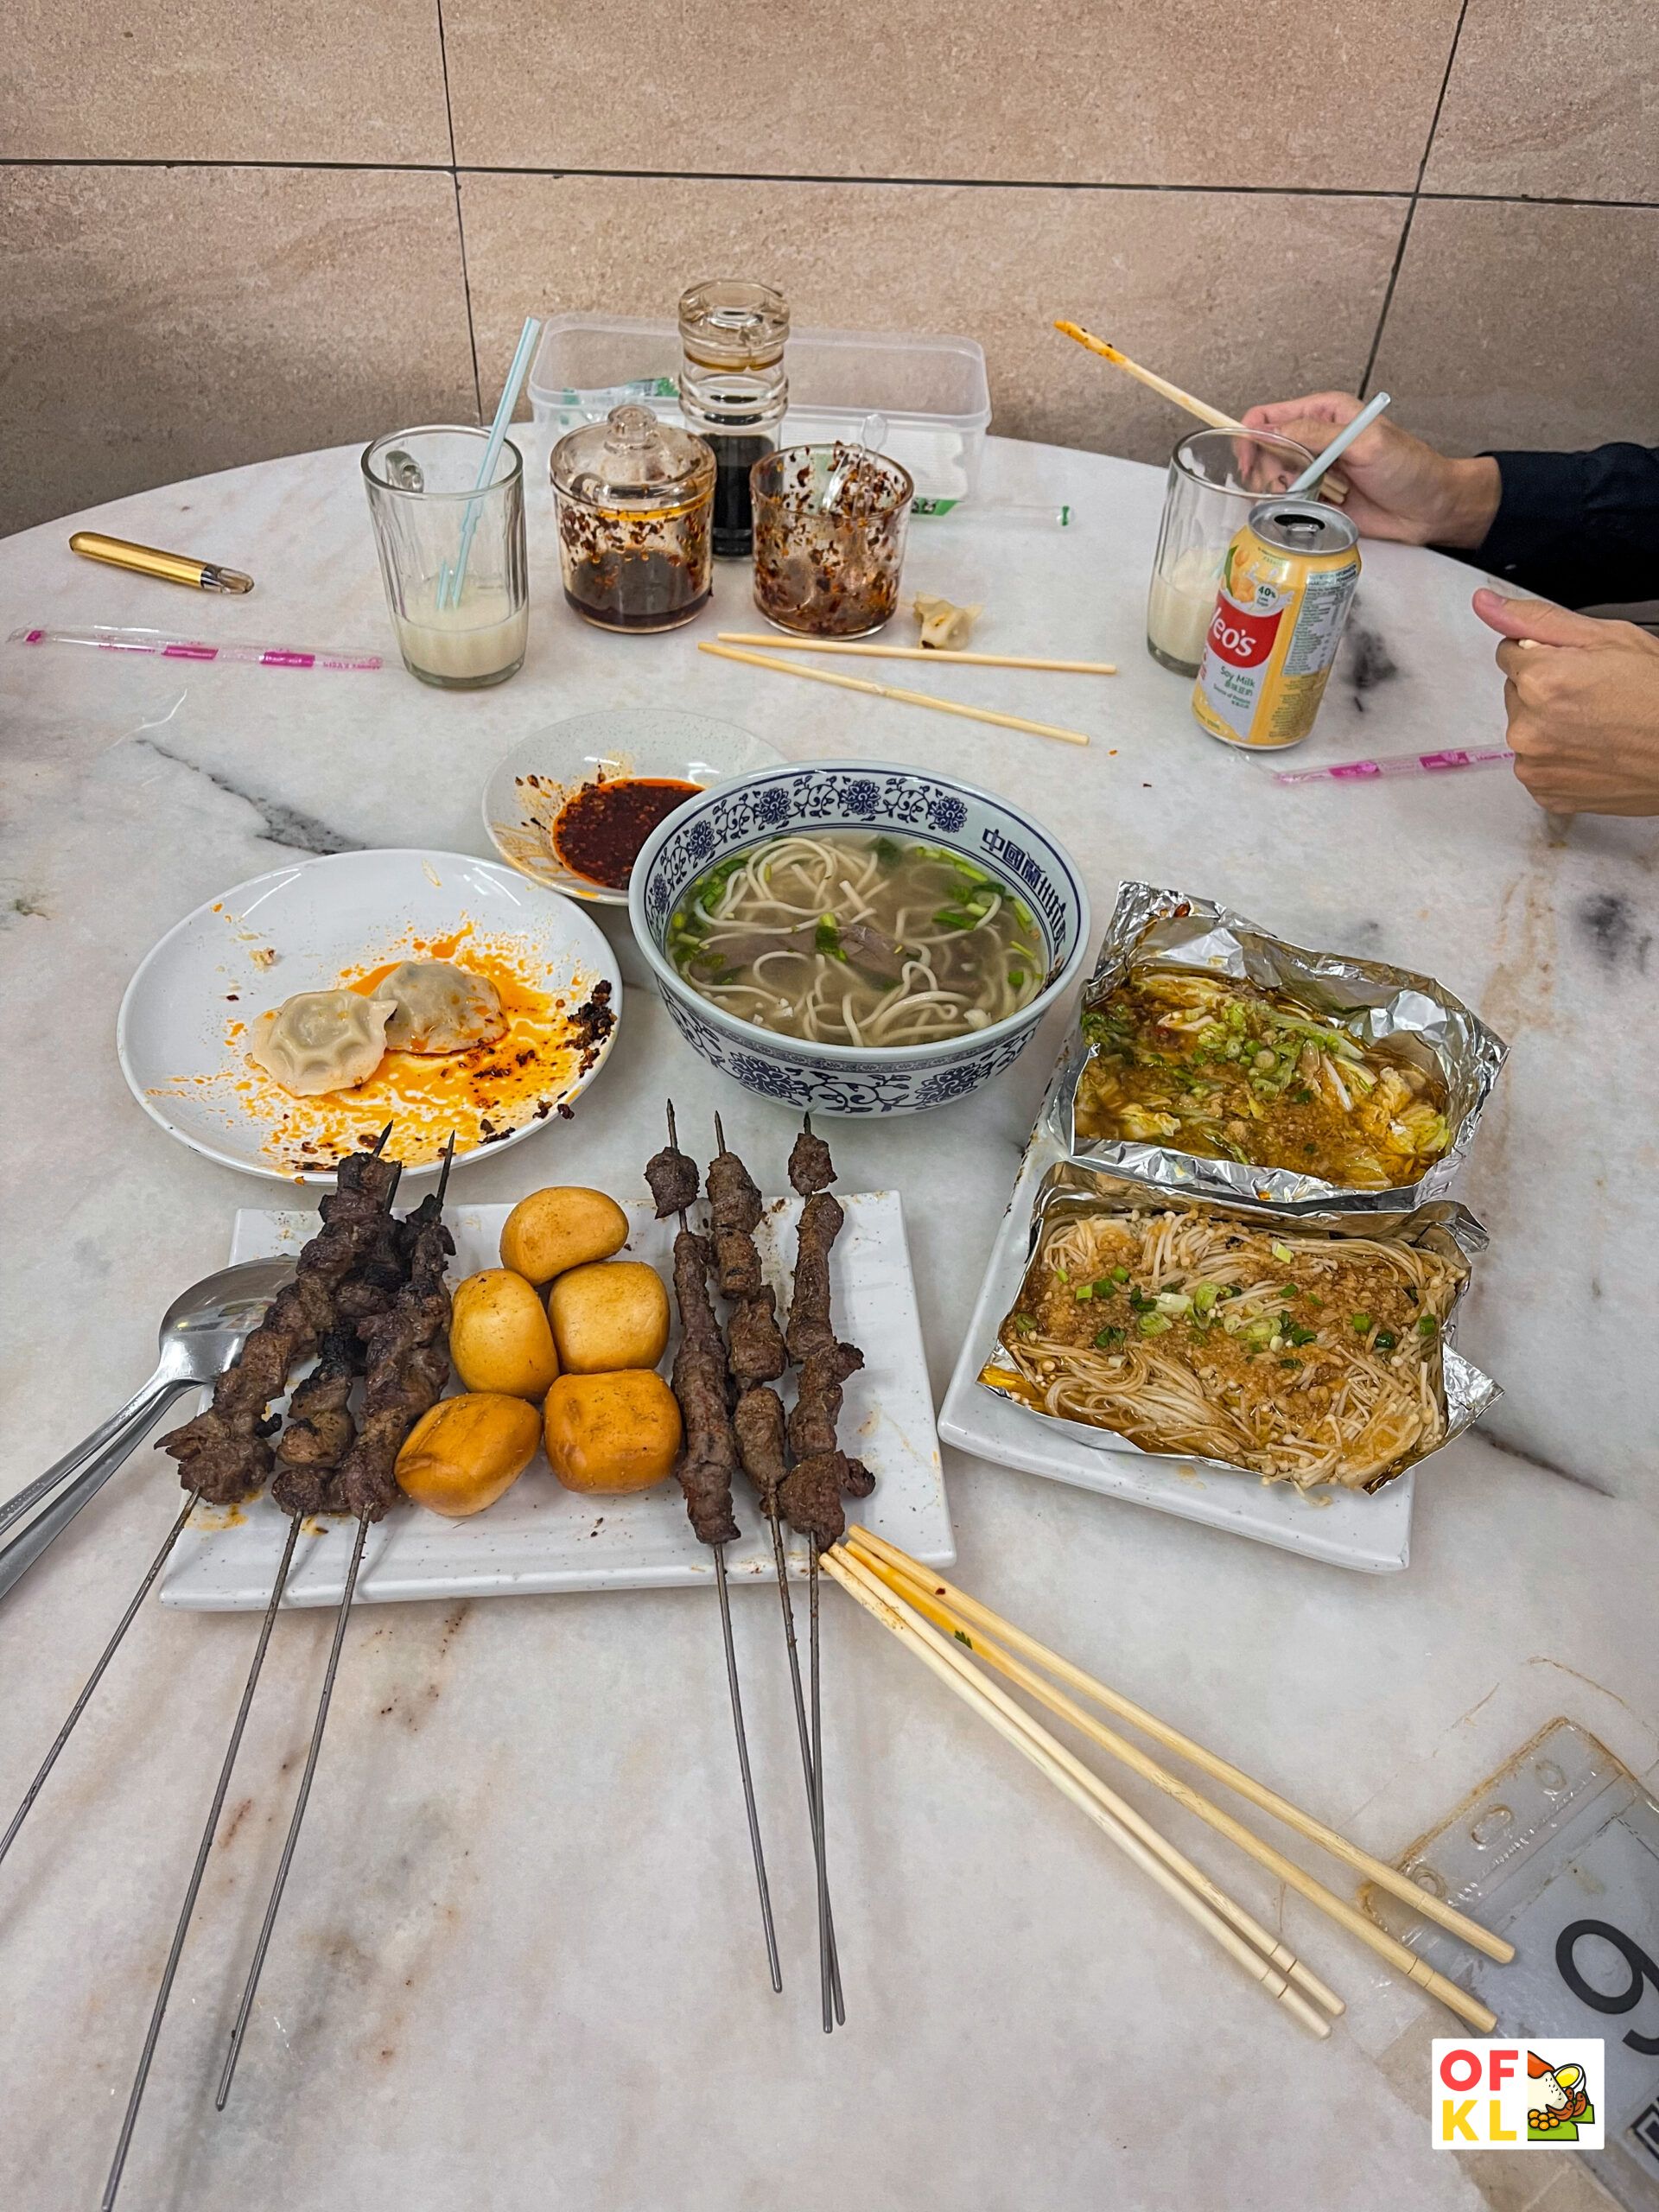 KL's Mee Tarik is our new Fave Late Night Supper Spot serving Skewers and Beef Noodles | OnlyFoodKL